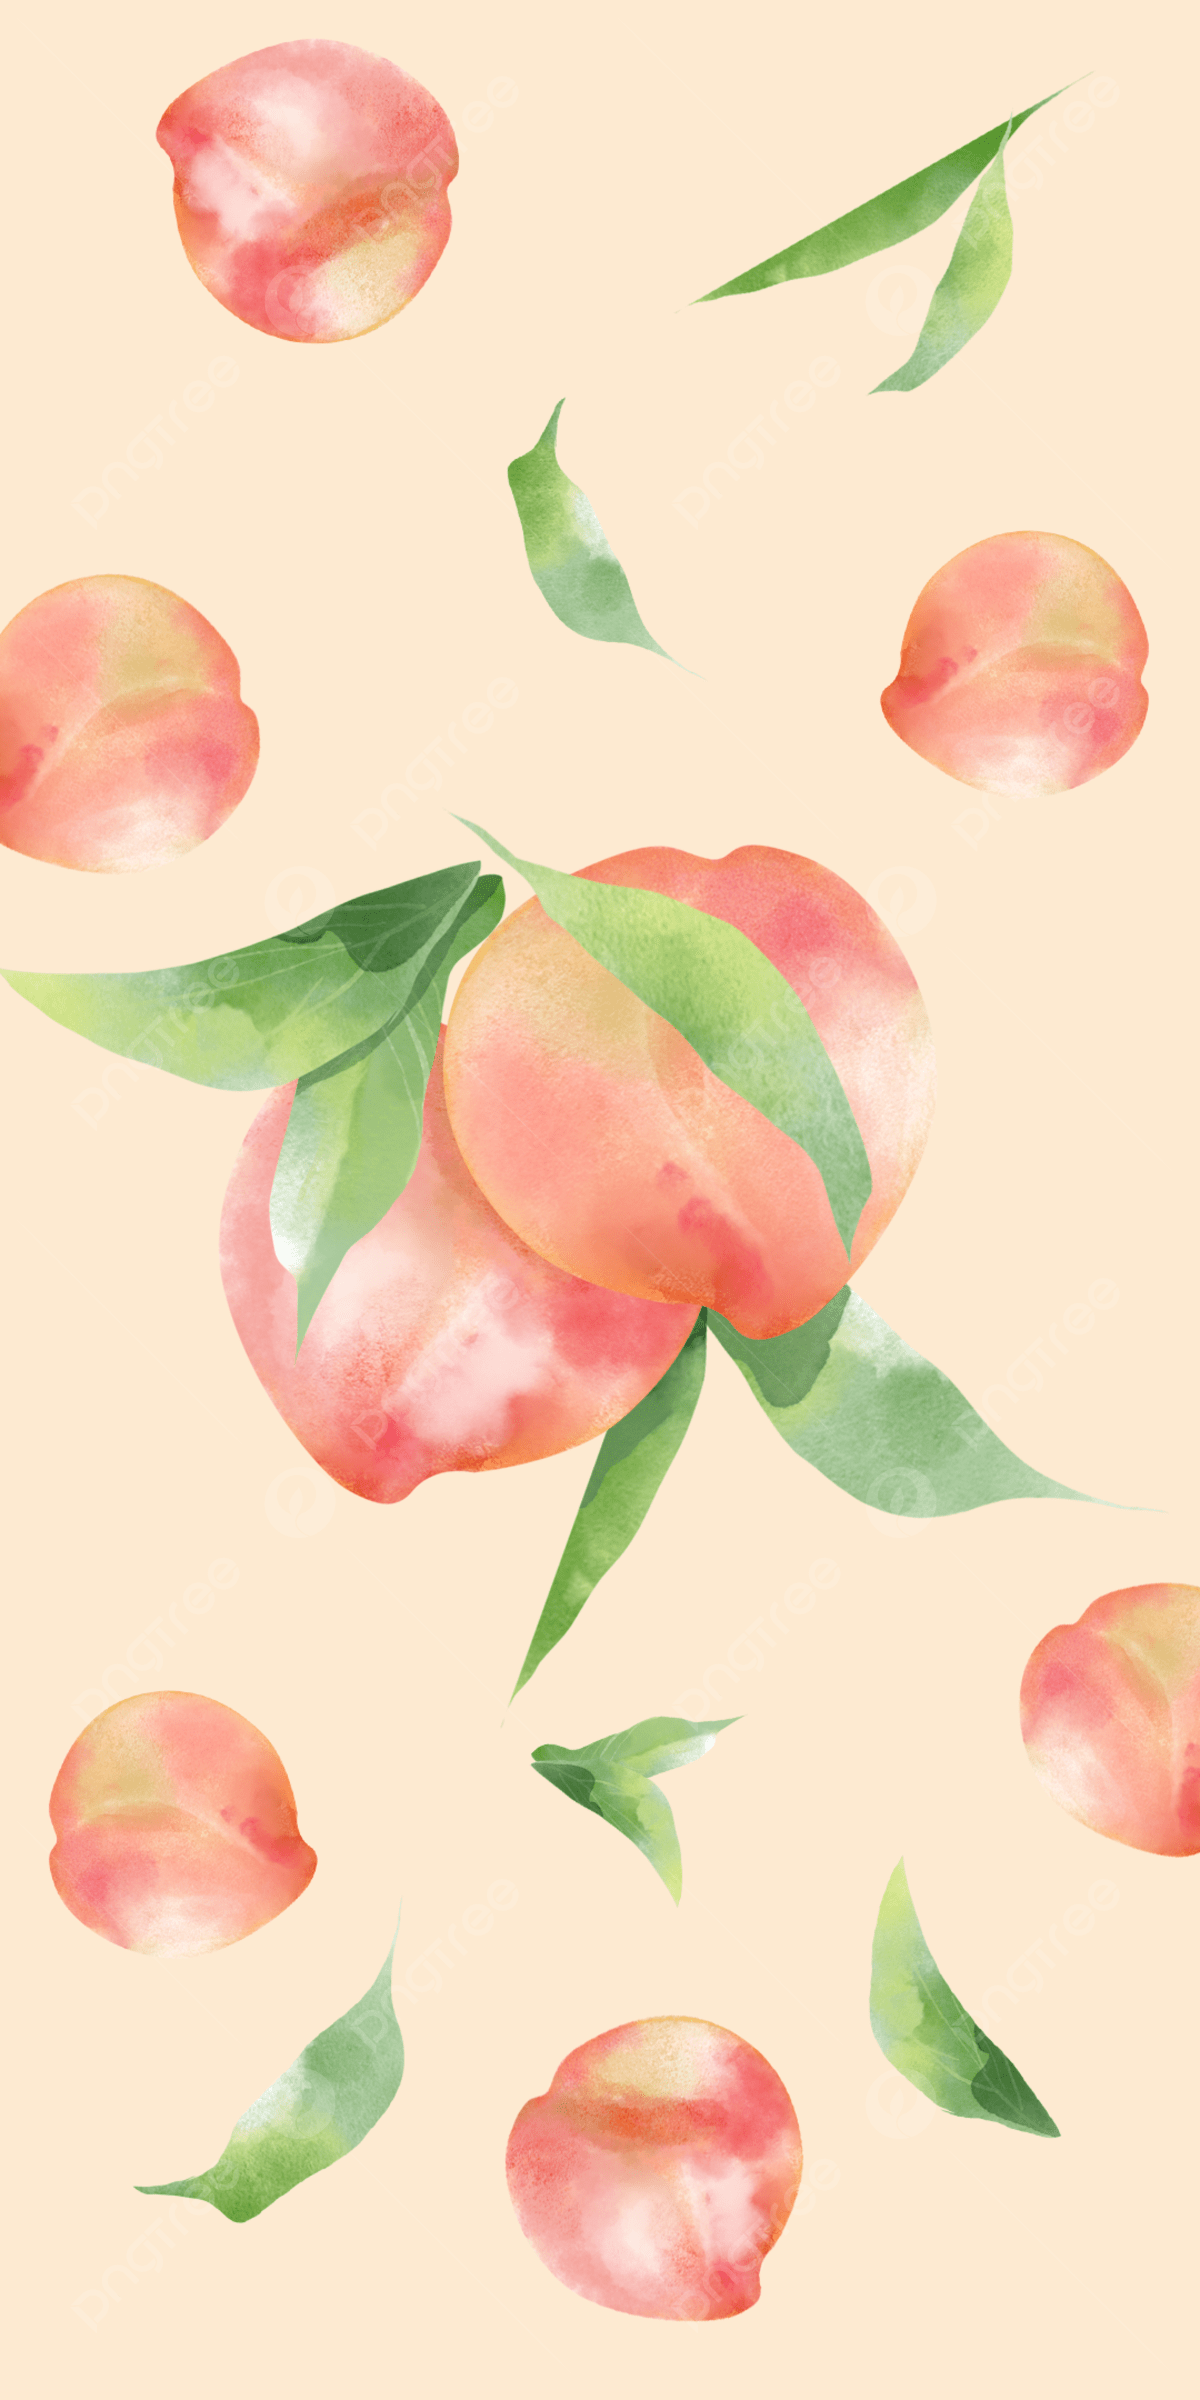 Aesthetic wallpaper for phone with watercolor green leaf and peach background. - Peach